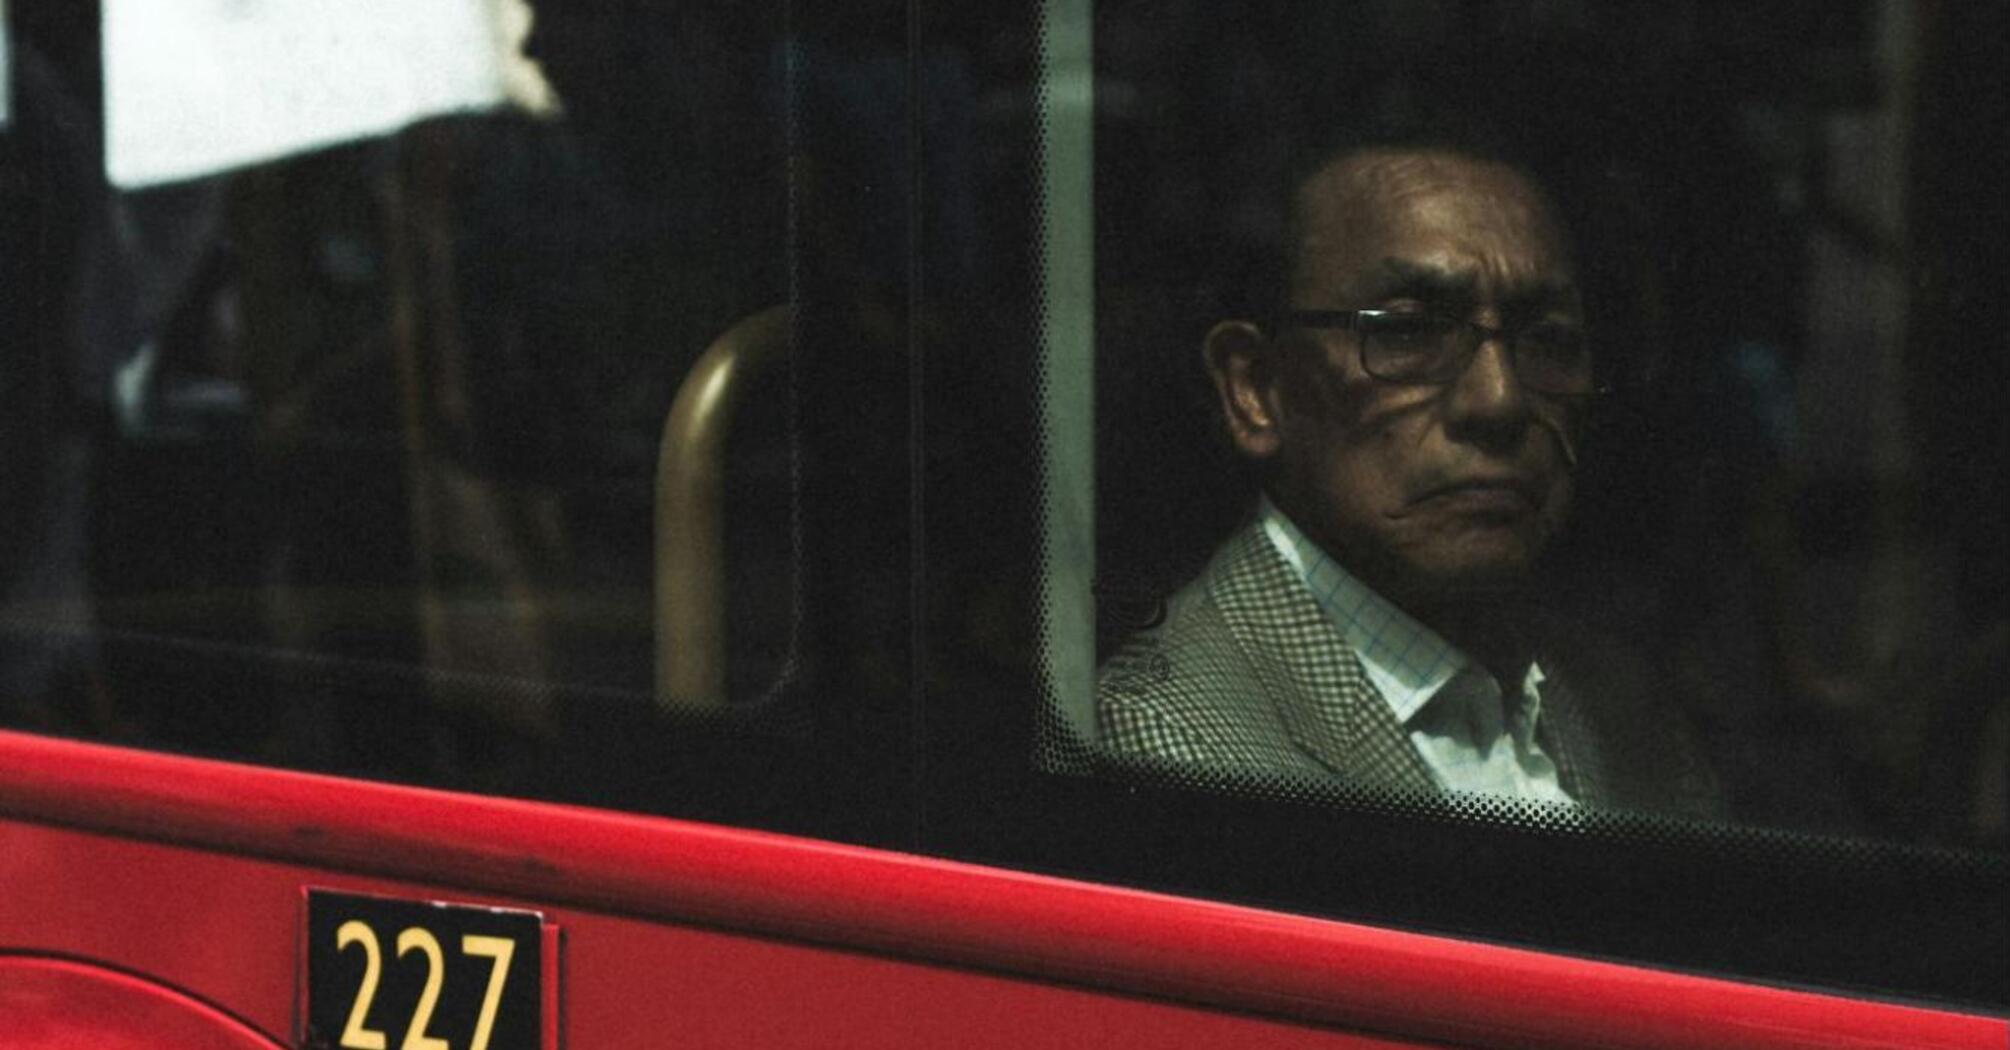 An older man sitting inside a red bus, looking out of the window